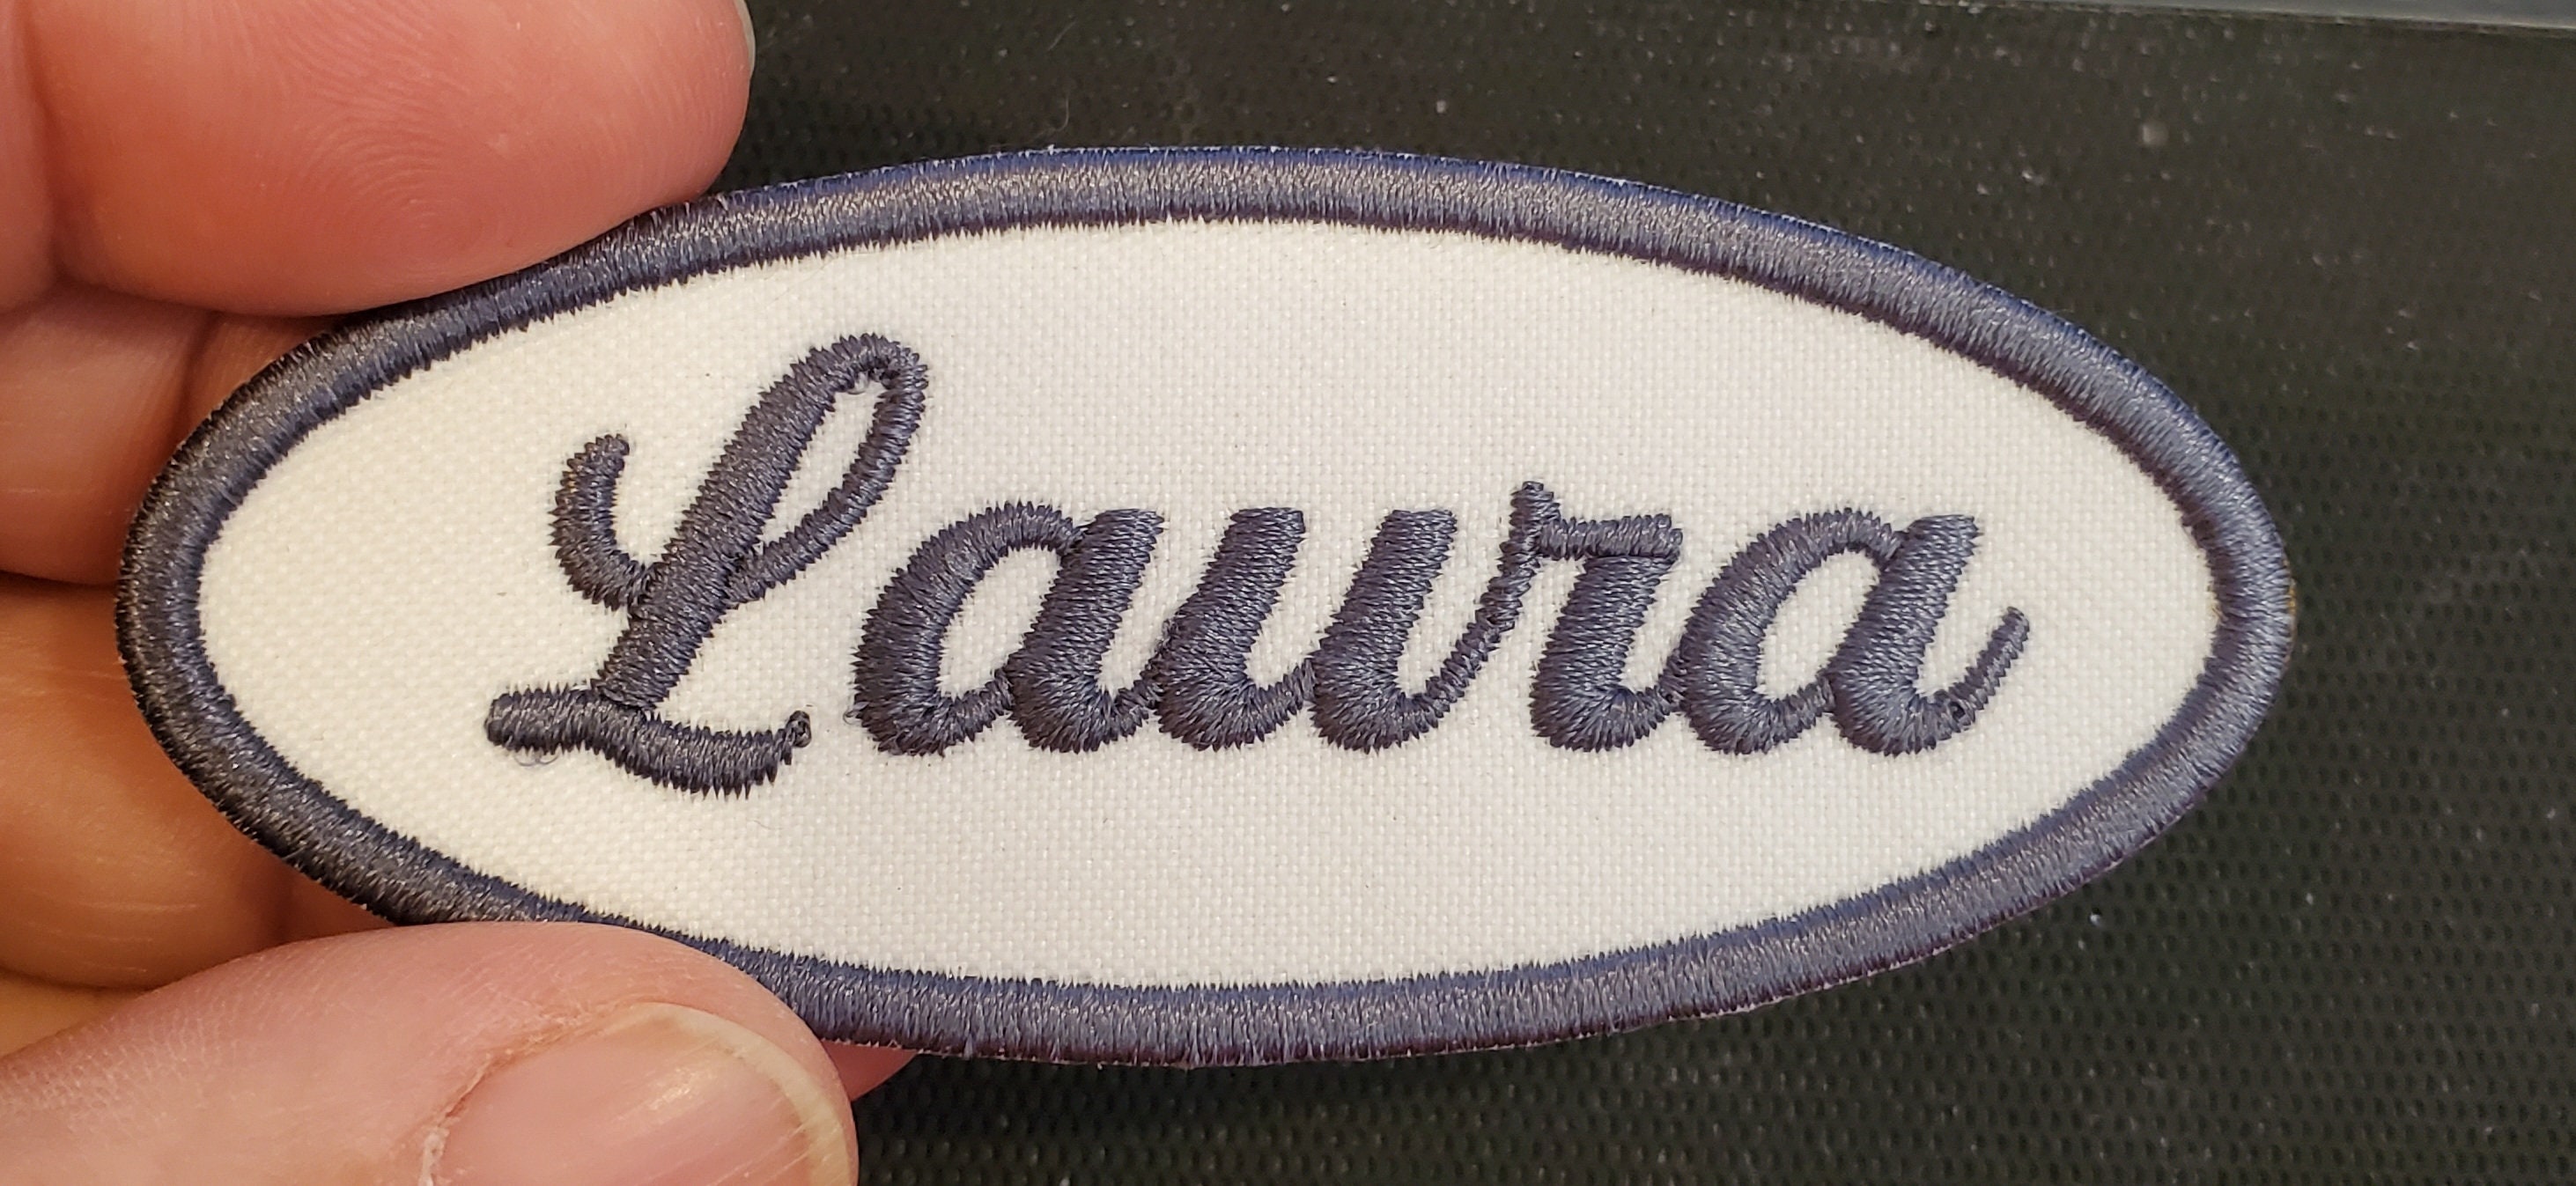 LOVE IT** Custom Name patch Iron on / Sew on Patch, Fast Shipping